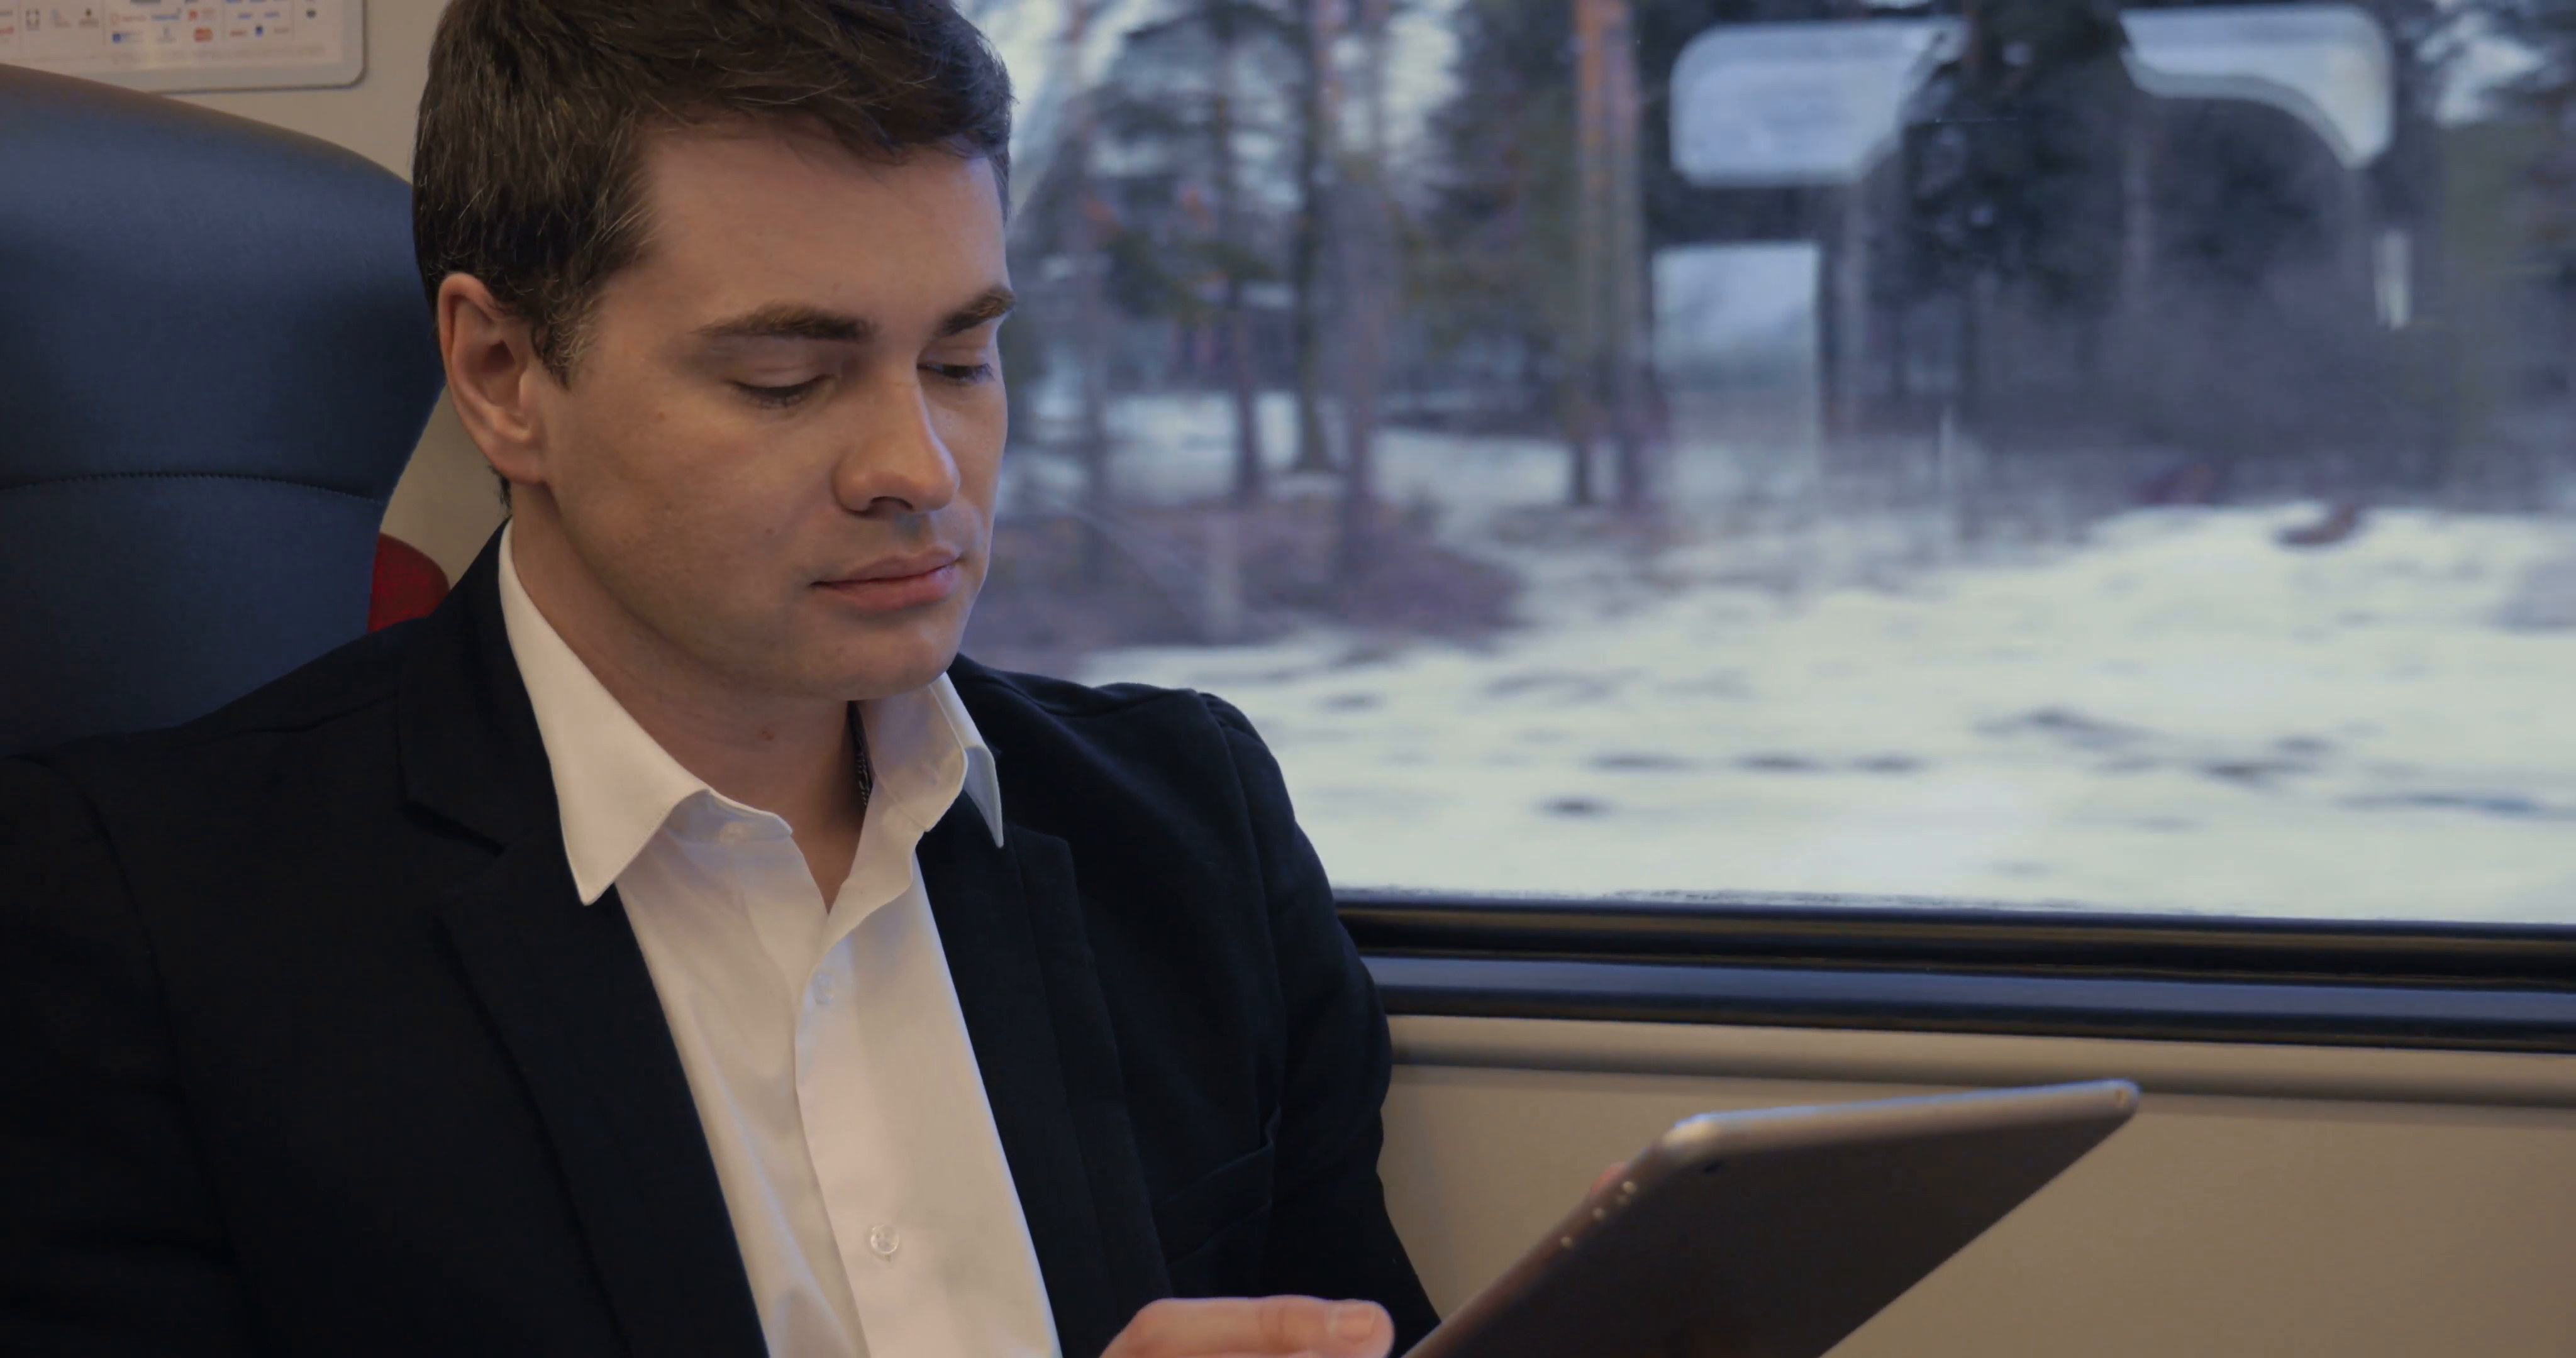 A man in the train using his tablet